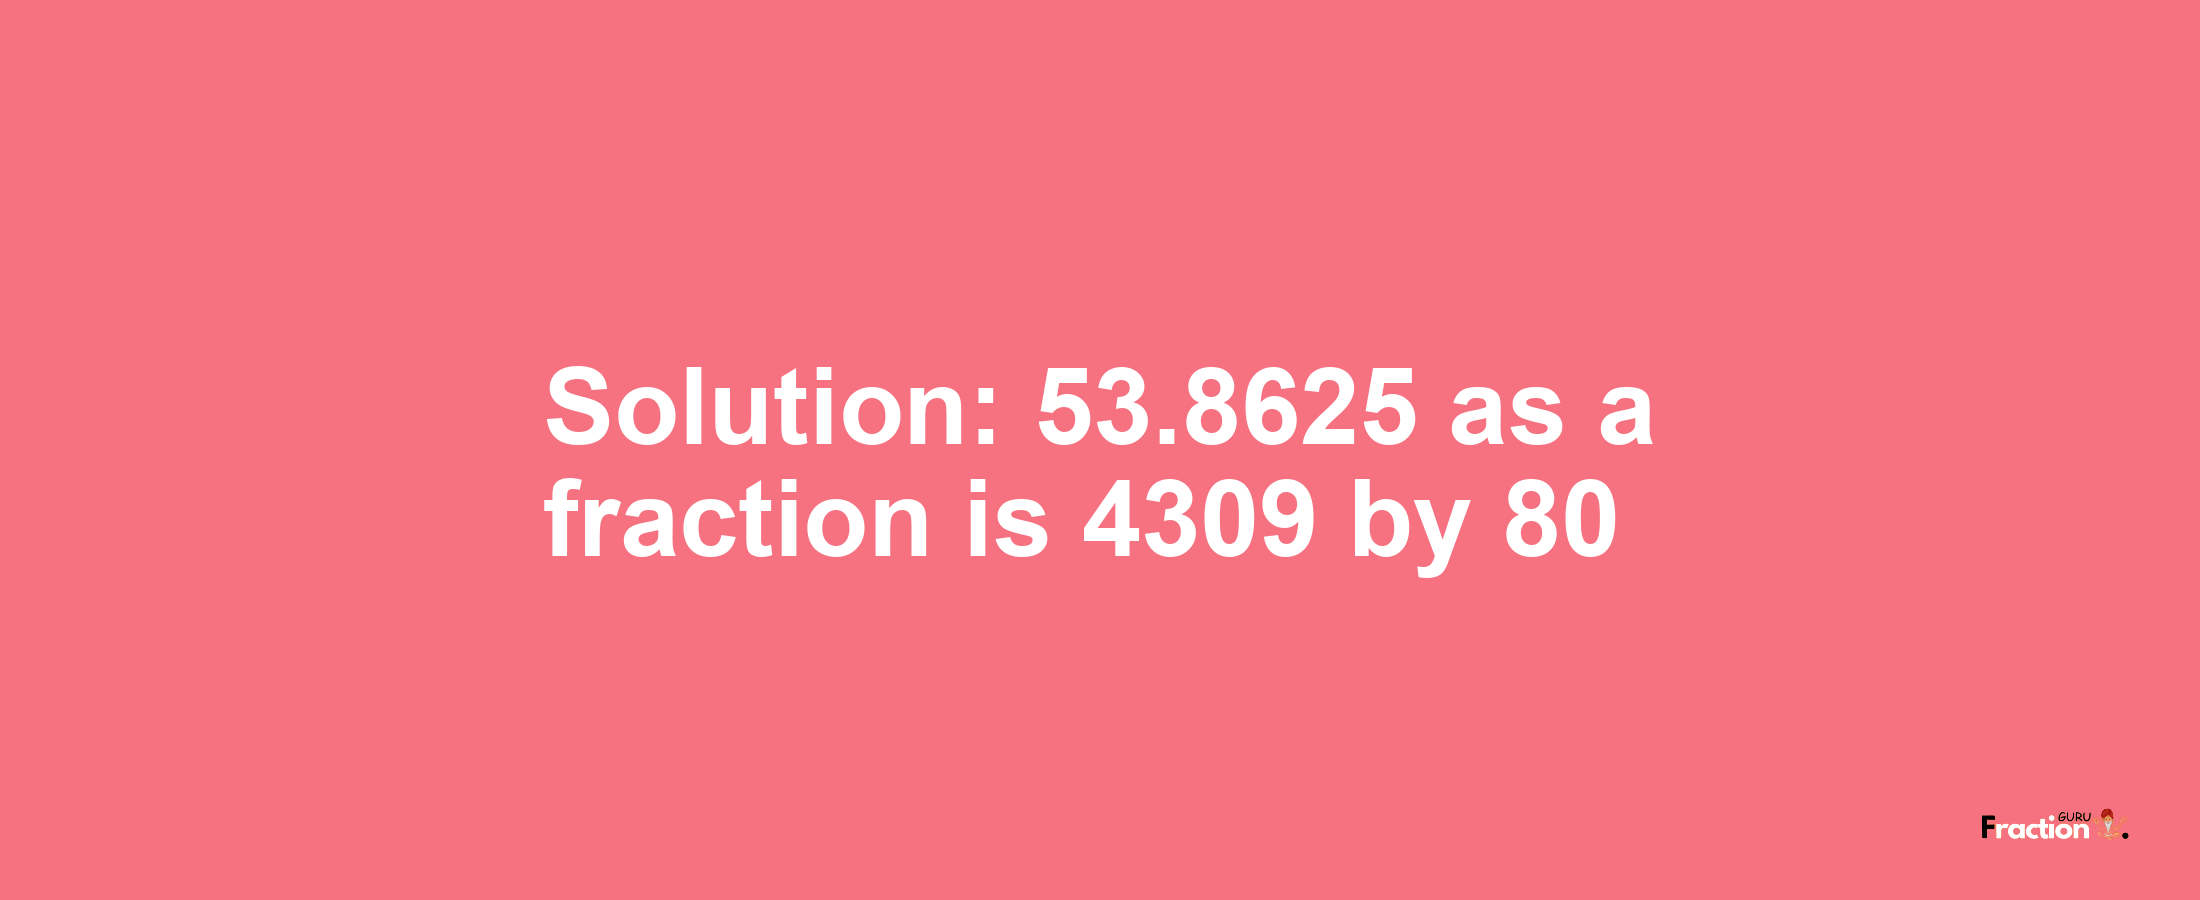 Solution:53.8625 as a fraction is 4309/80